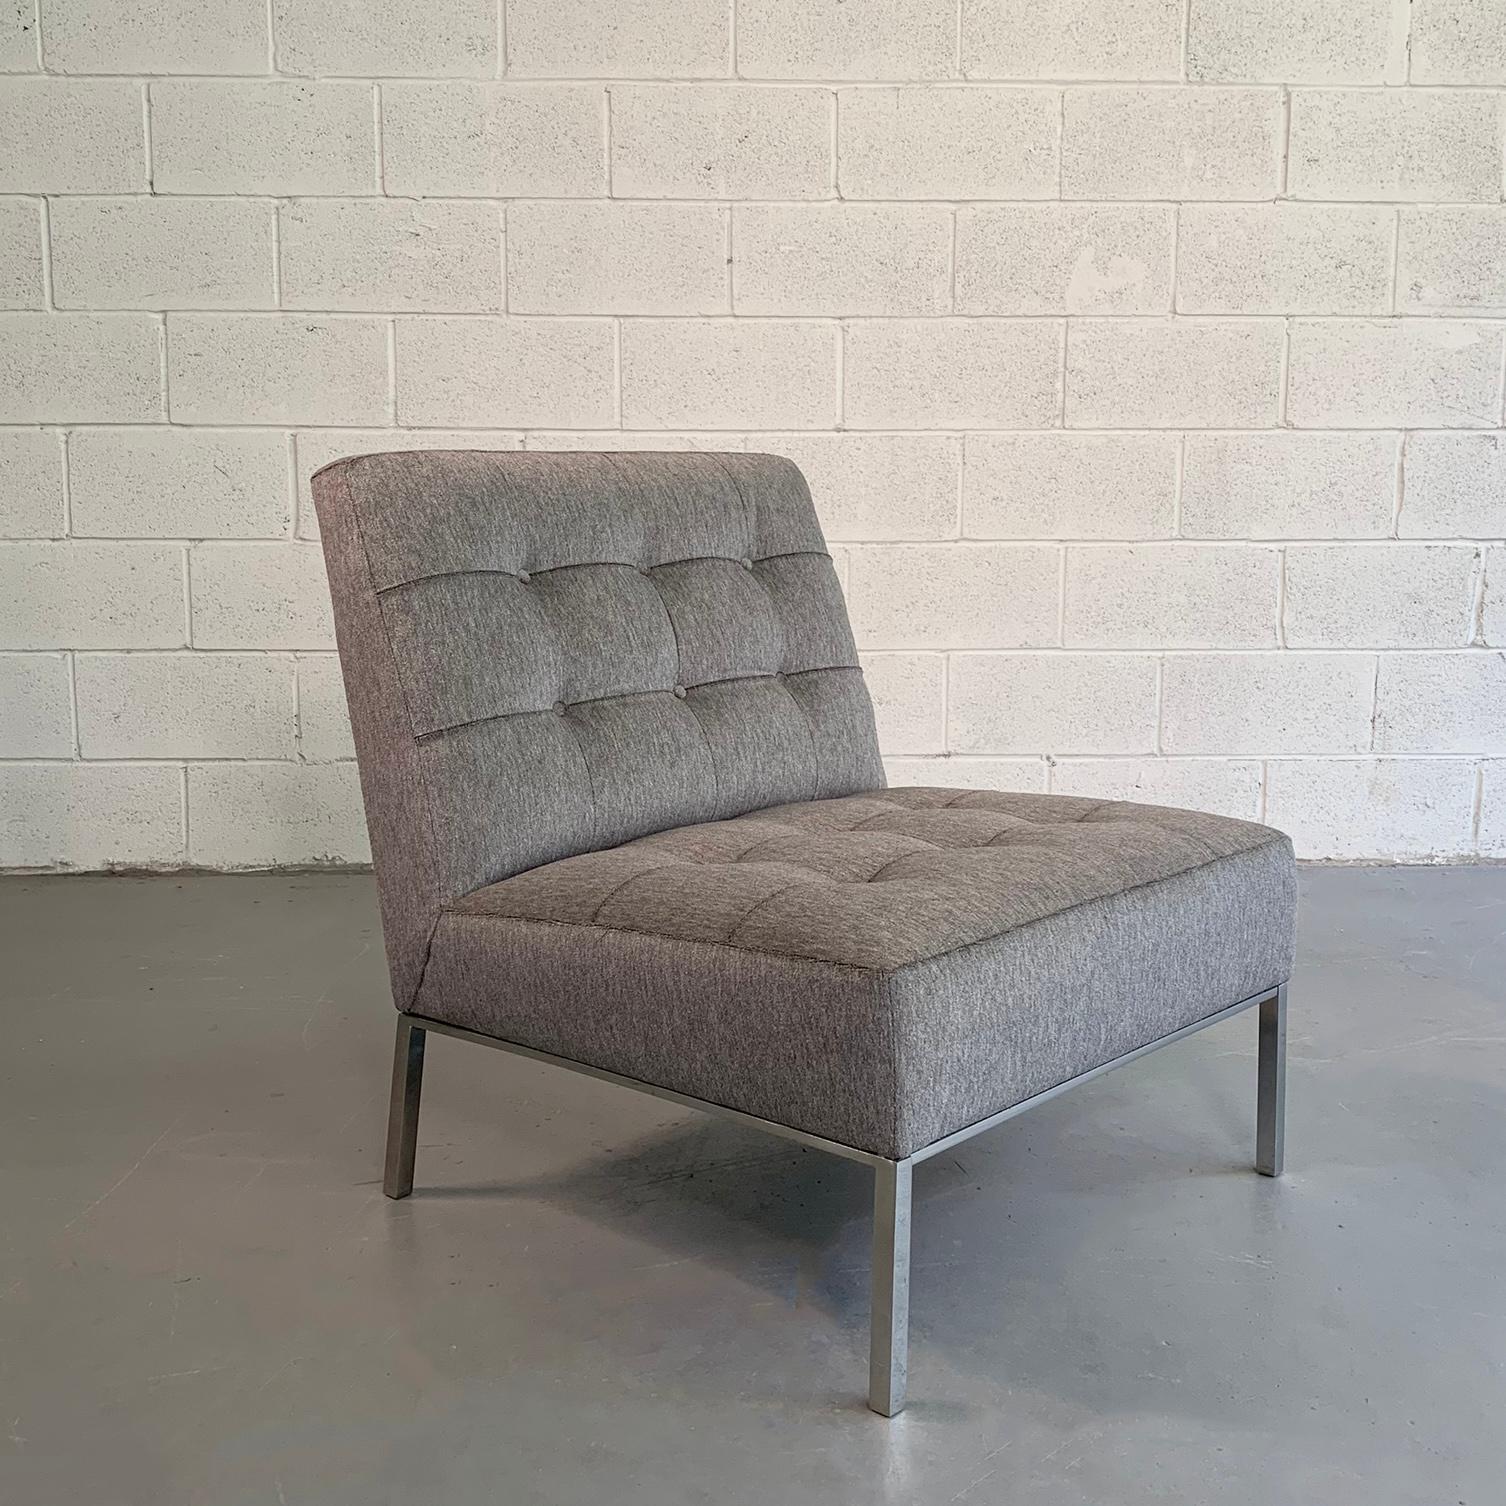 Mid-Century Modern, slipper, lounge chair by Florence Knoll features a chrome base with new upholstery in medium gray mohair.